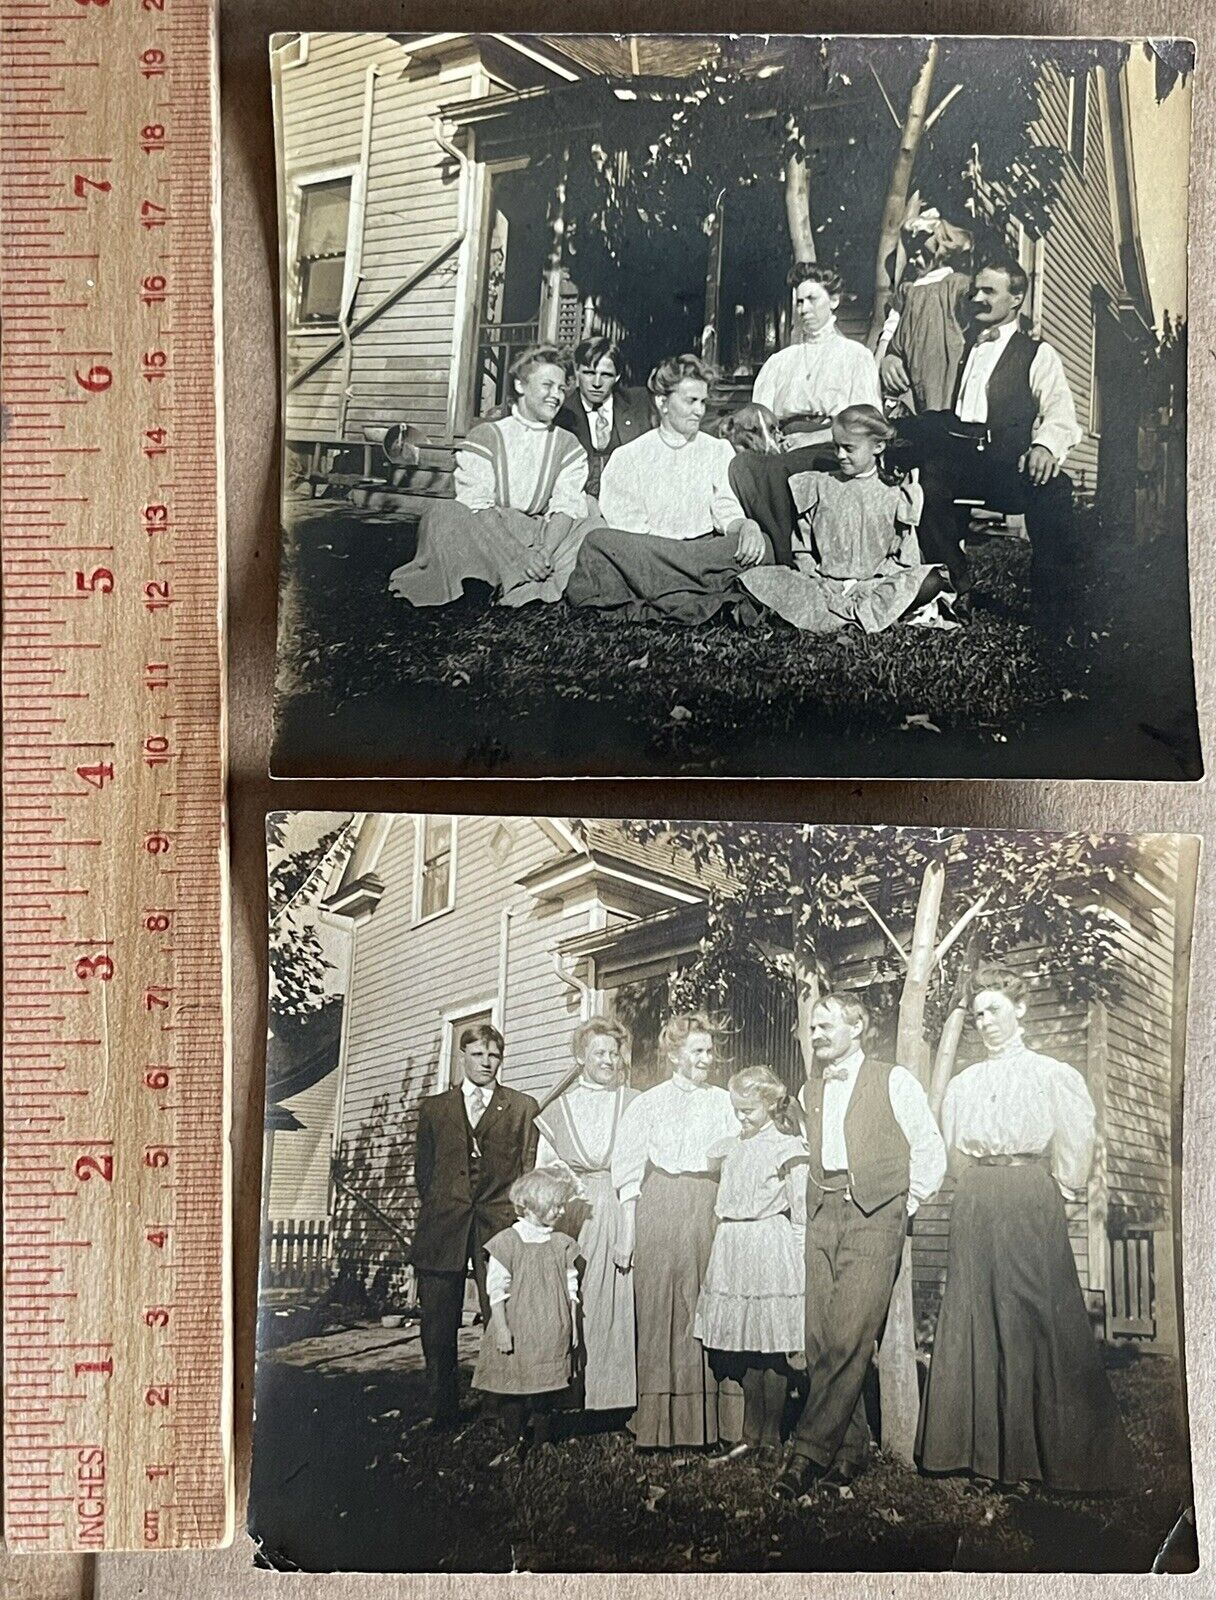 Antique Vtg Photo Black White Sepia Snapshot Family IDENTIFIED South Bend, Ind